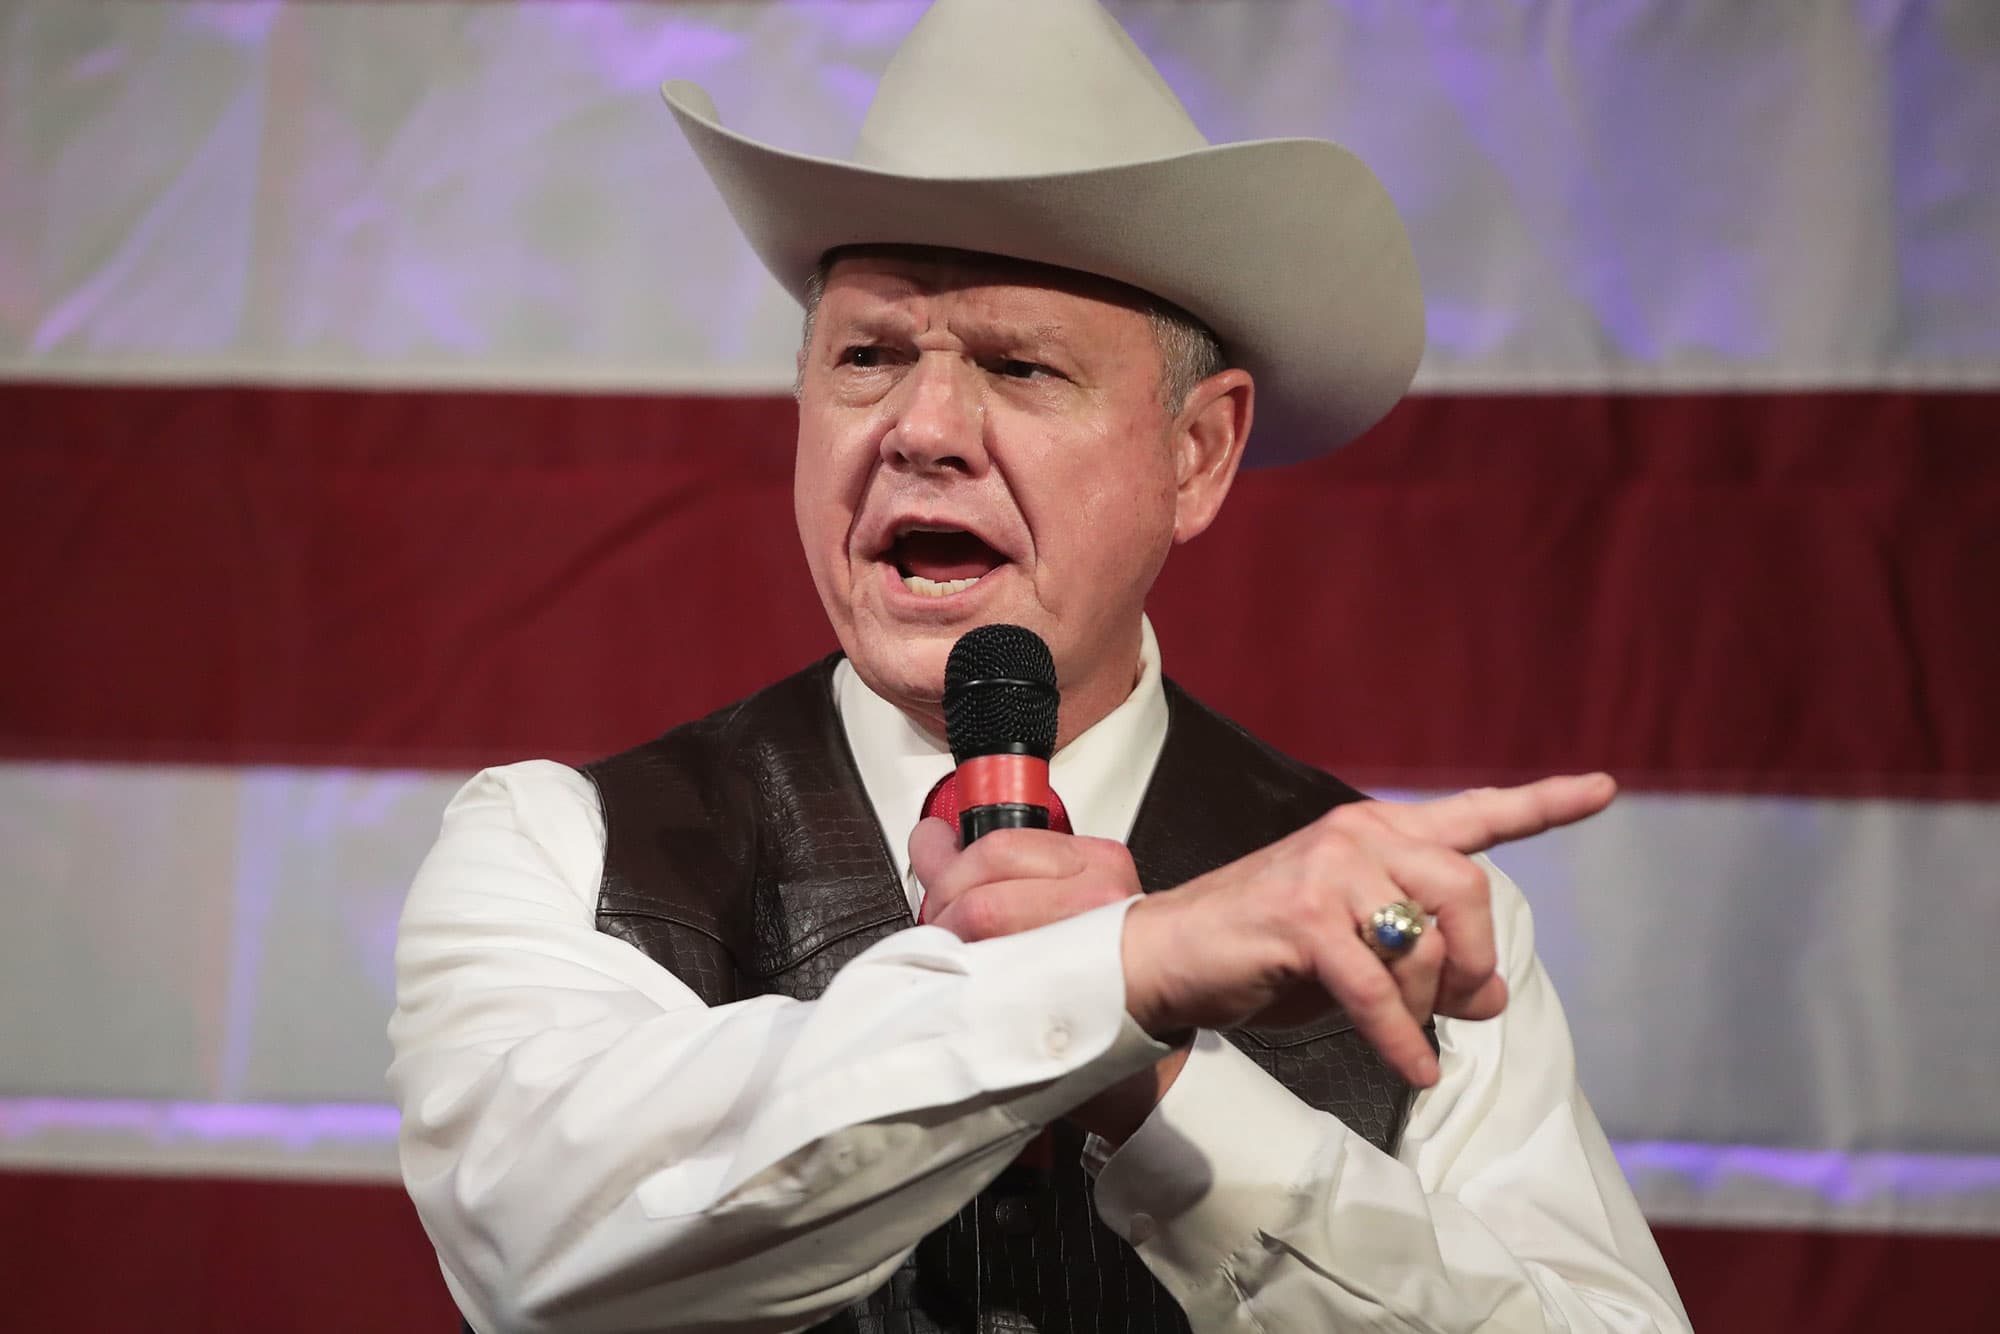 Roy Moore, accused of sexual misconduct with teens, will run for Senate again in Alabama despite Trump's wishes